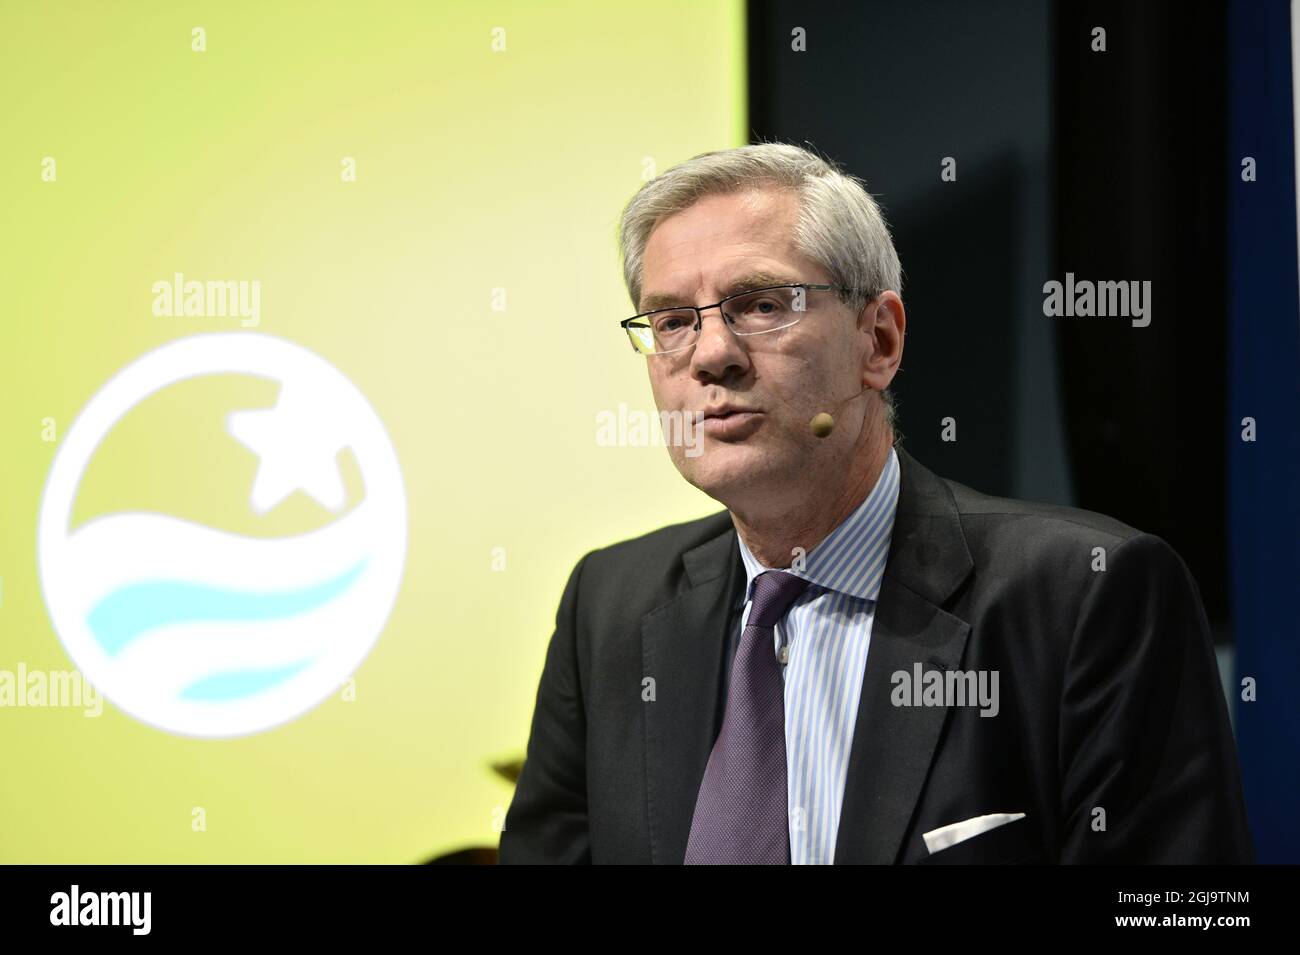 Vattenfall Chief Executive Magnus Hall speaks during a news conference at Vattenfall head office in Stockholm Monday April 18, 2016. State-owned Swedish utility Vattenfall said on Monday it had agreed to sell its loss-making lignite coal mines and associated power plants in Germany to Czech investor EPH. Photo Henrik Montgomery / TT kod 10060 Stock Photo